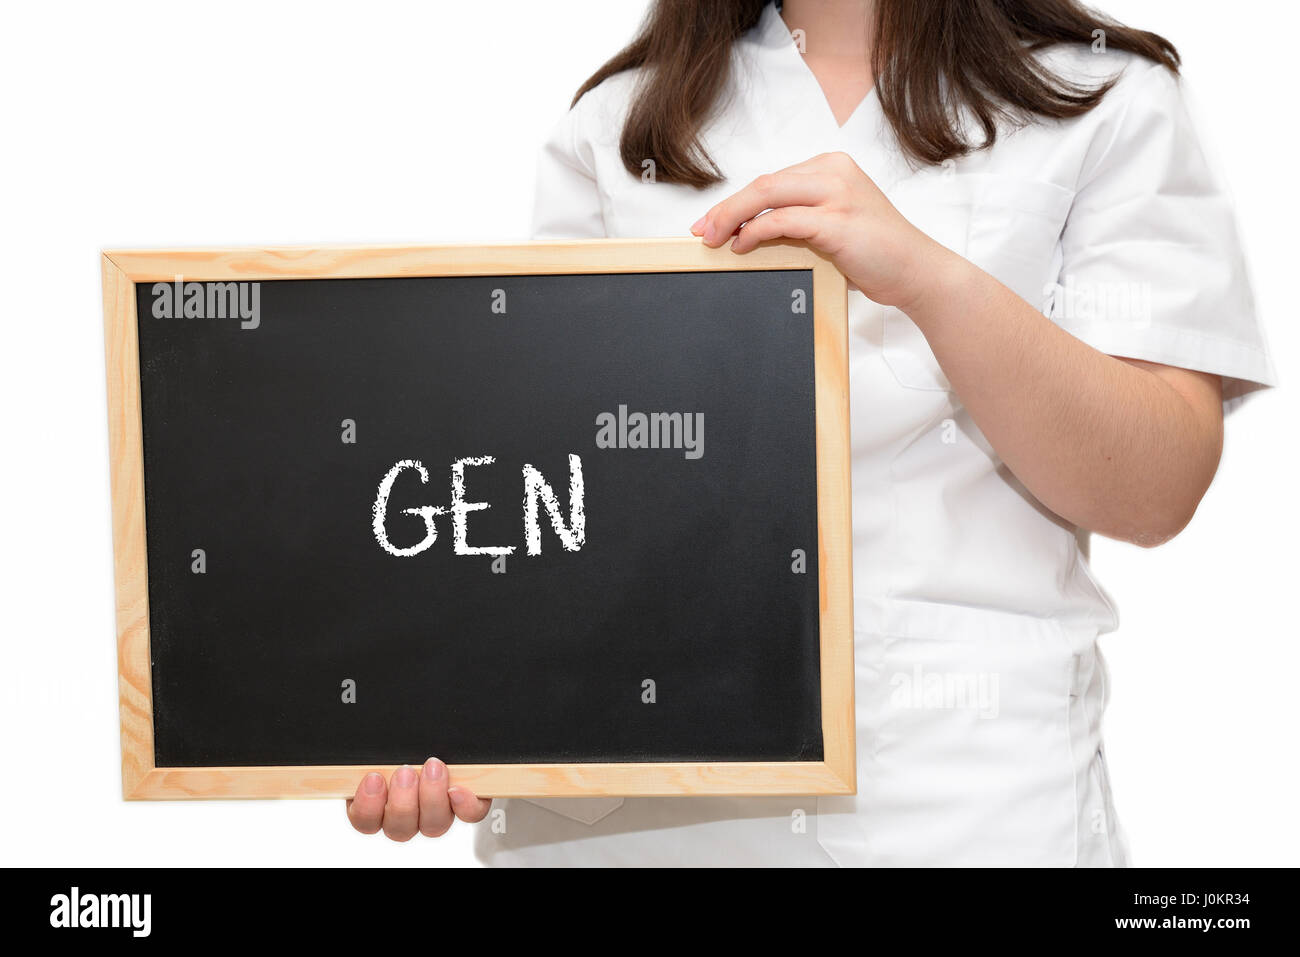 Female nurse holding a slate board with the text Gen written with chalk, isolated on white background. Stock Photo